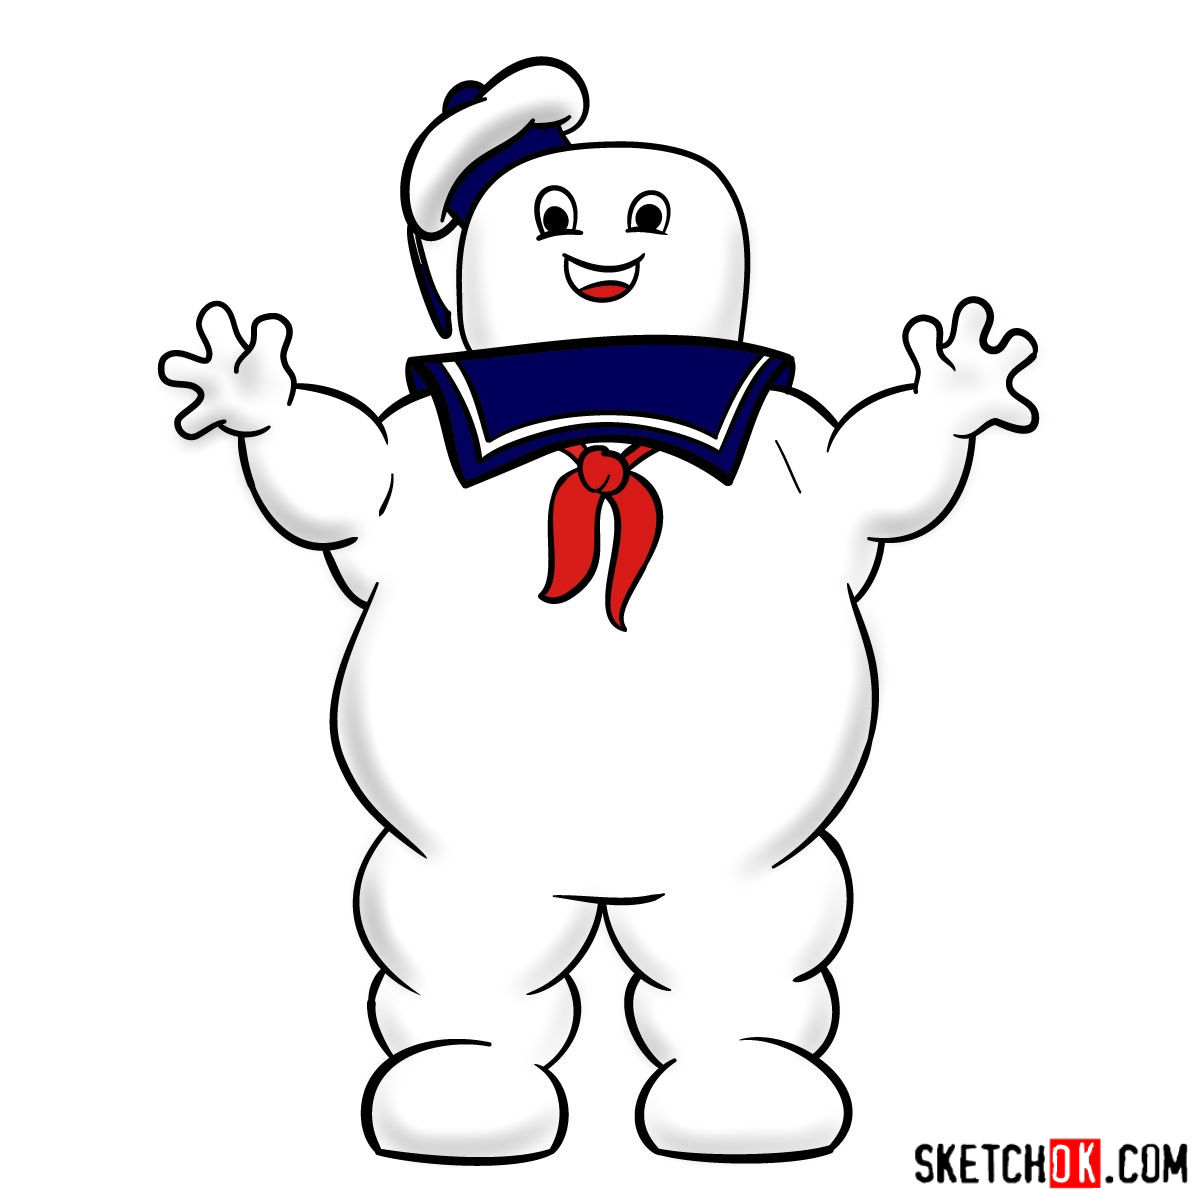 How to draw Stay Puft Marshmallow Man